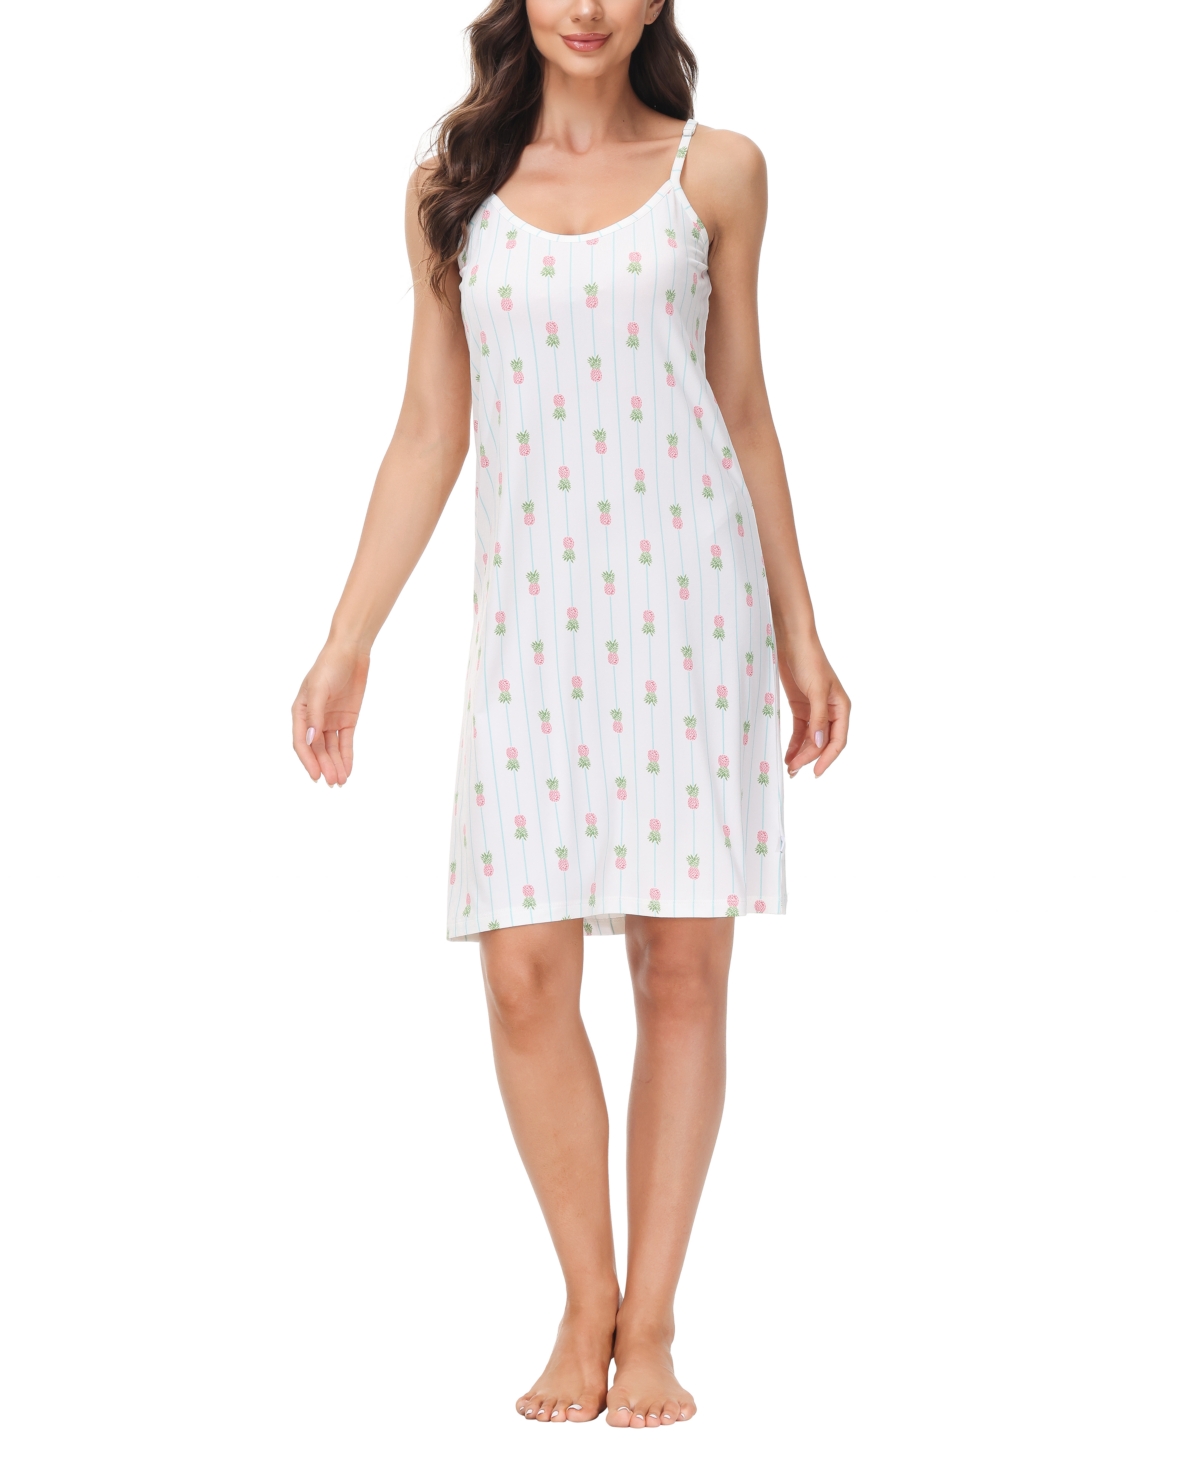 Echo Women's Printed Chemise Nightgown